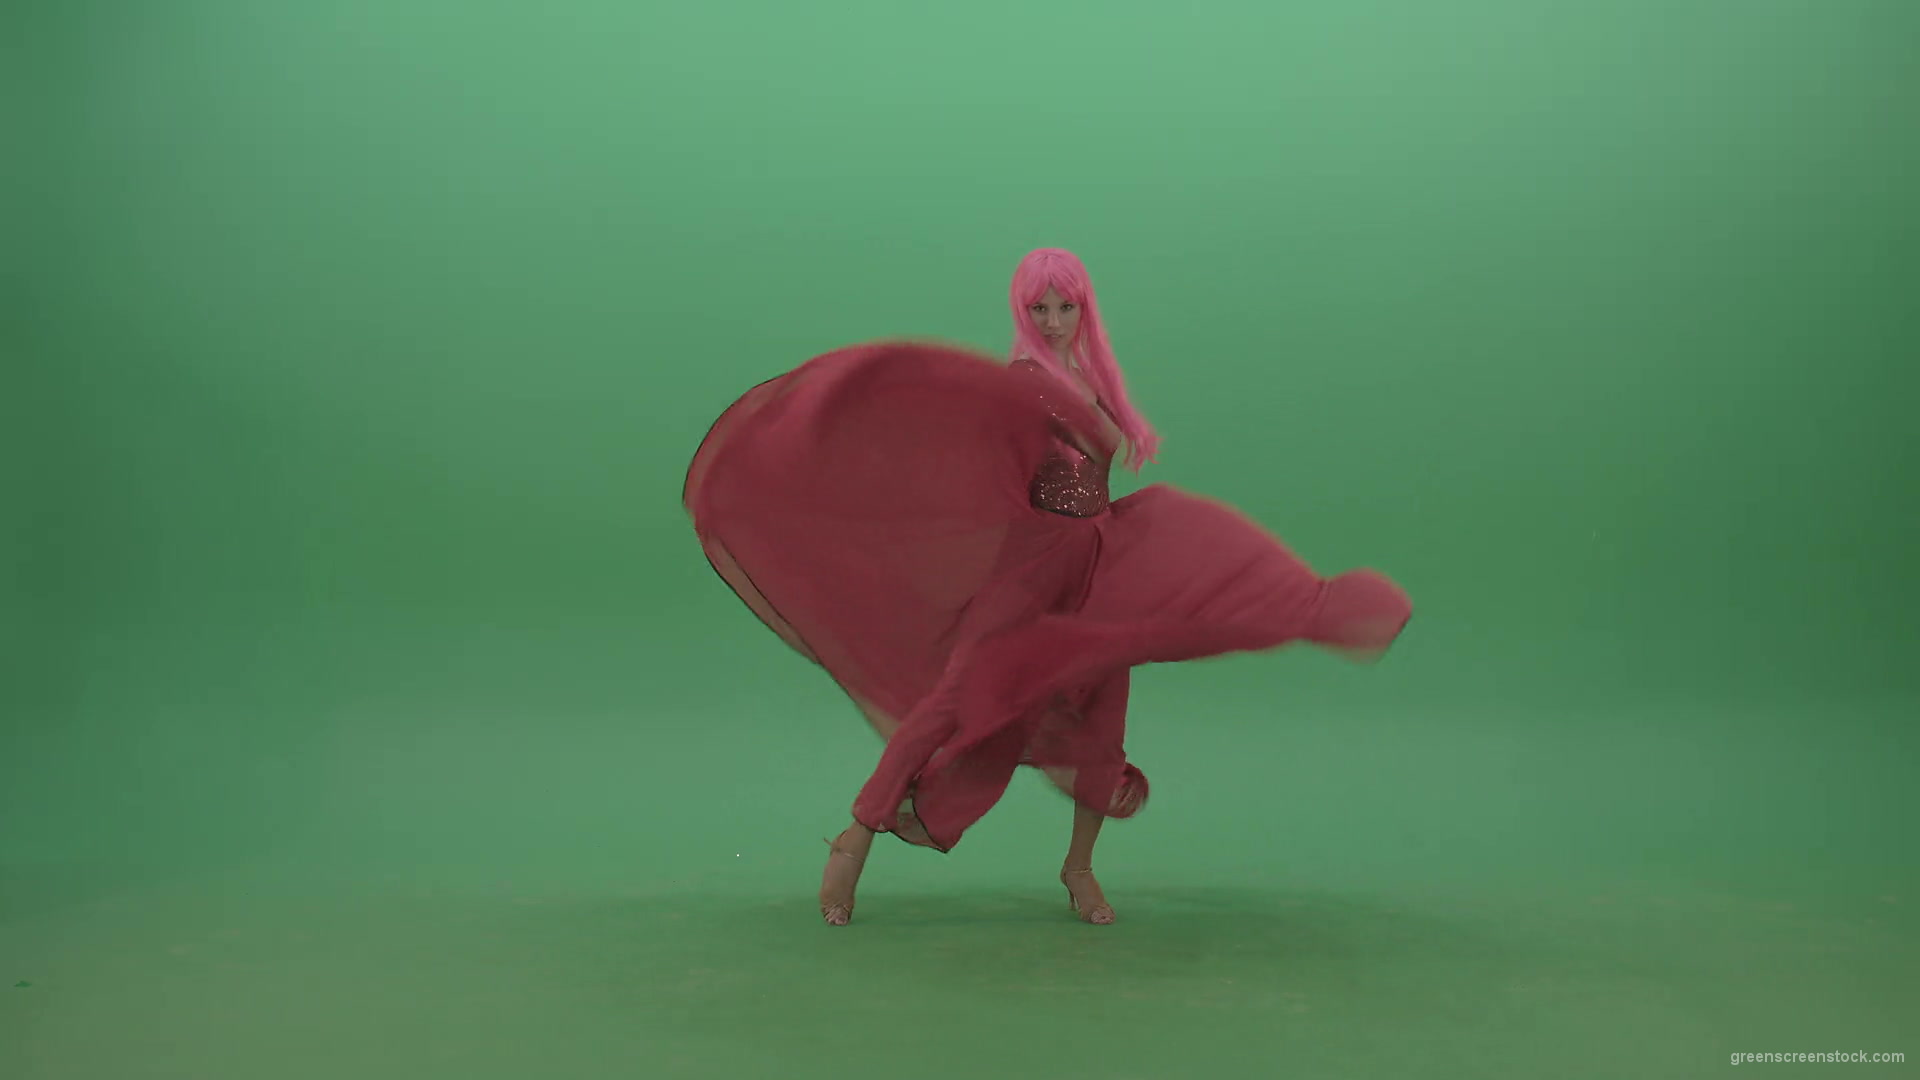 Beautiful-girl-in-red-dress-and-pink-hair-dancing-flamenco-and-spinning-on-green-screen-4K-Video-Footage-1920_002 Green Screen Stock